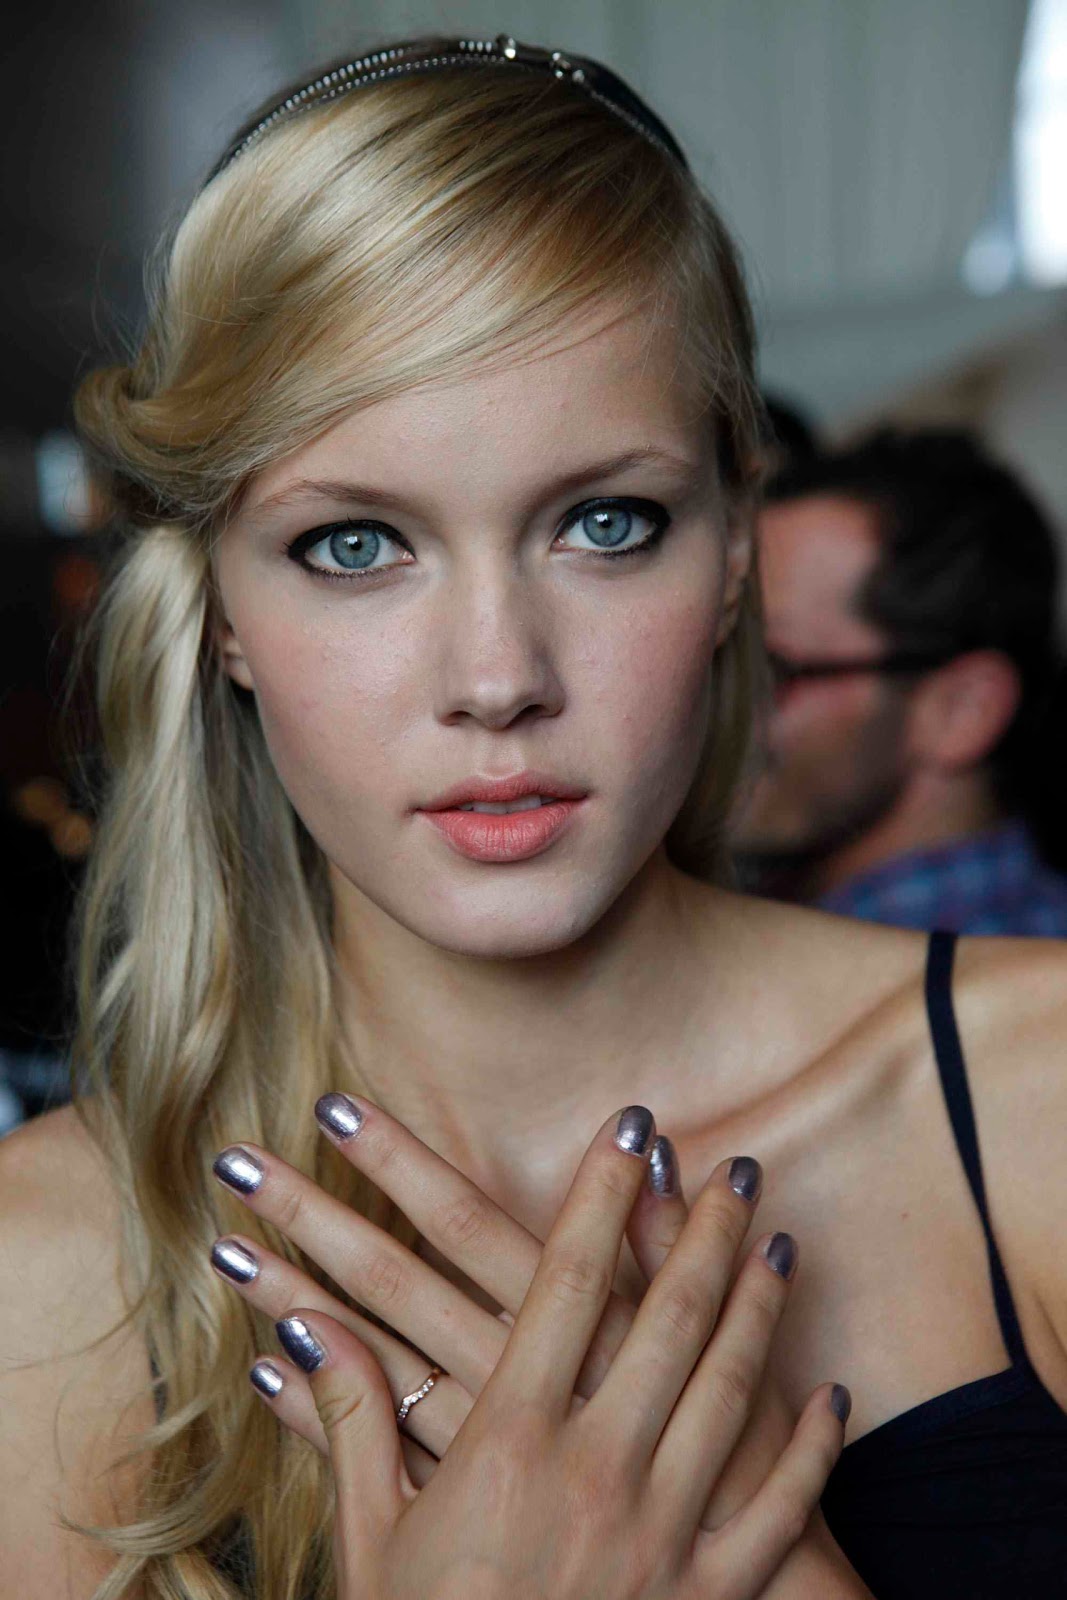 trend displayed during New York Fashion Week-with my nail polish!